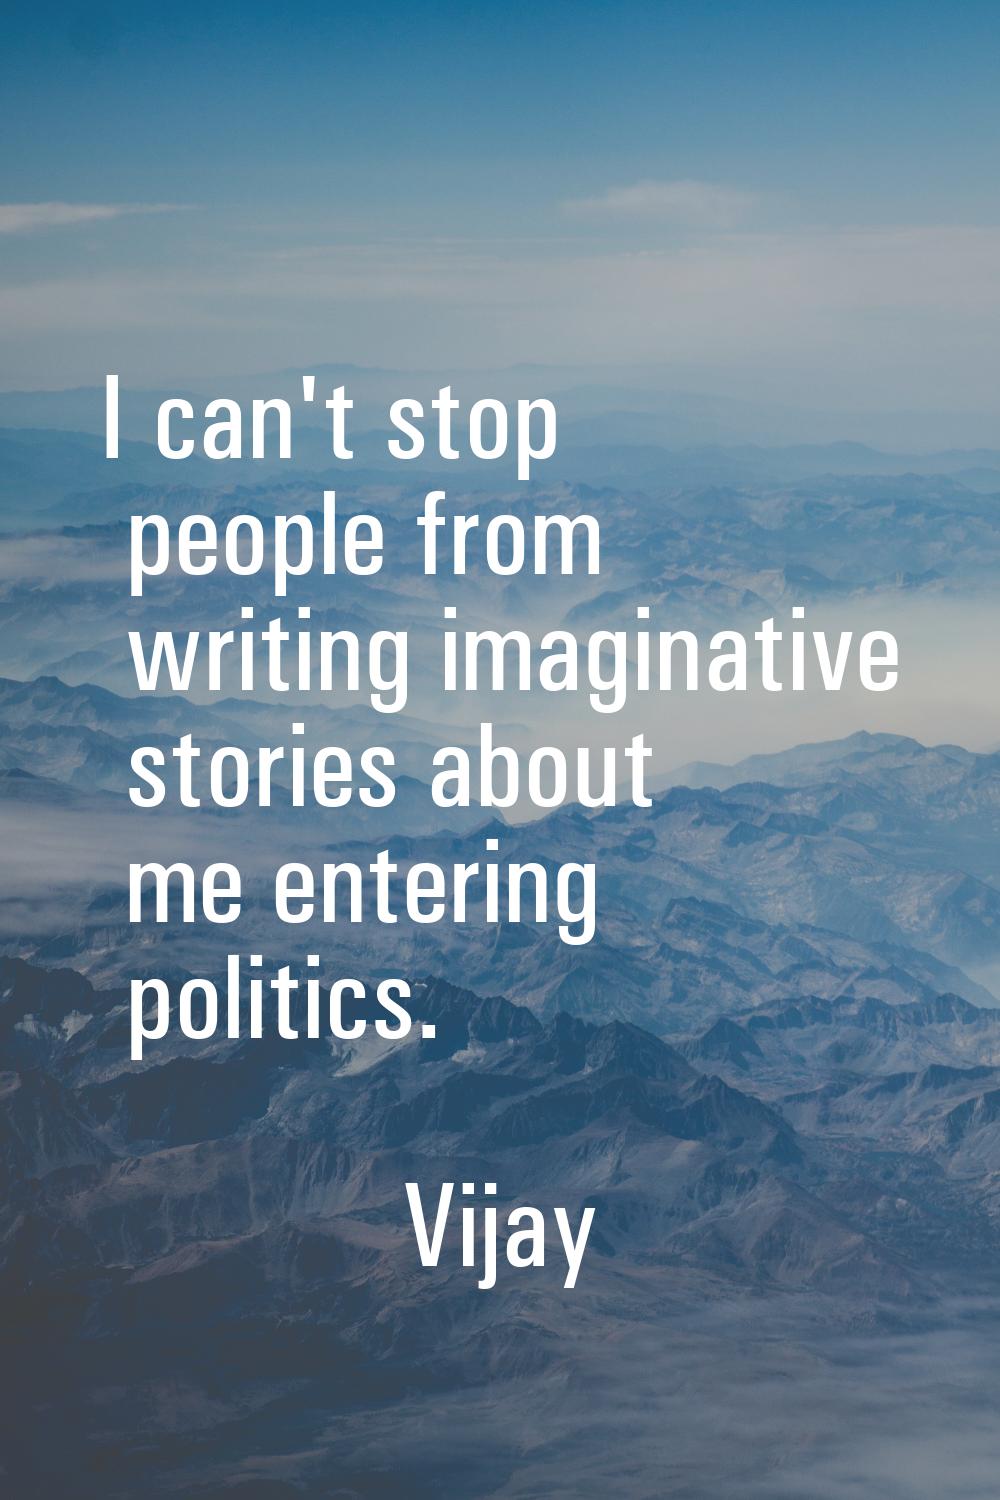 I can't stop people from writing imaginative stories about me entering politics.